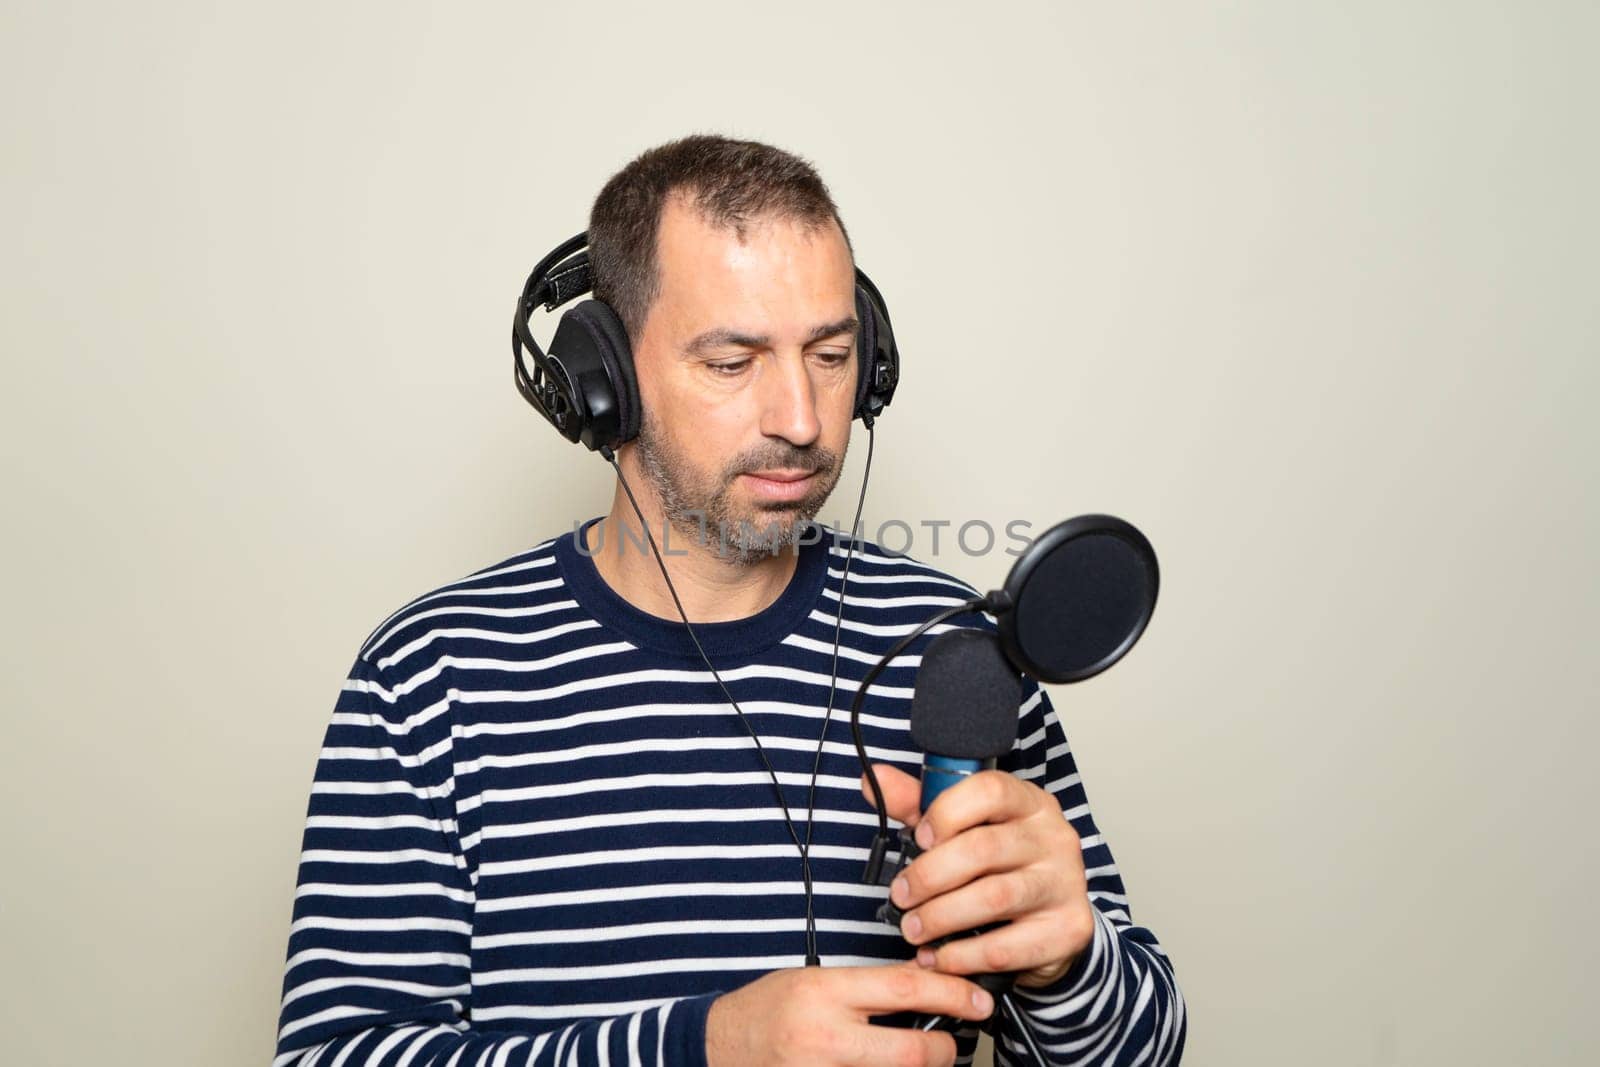 Bearded Hispanic man in his 40s wearing a striped sweater looking confused while inspecting a microphone and headphones, isolated on beige background. by Barriolo82